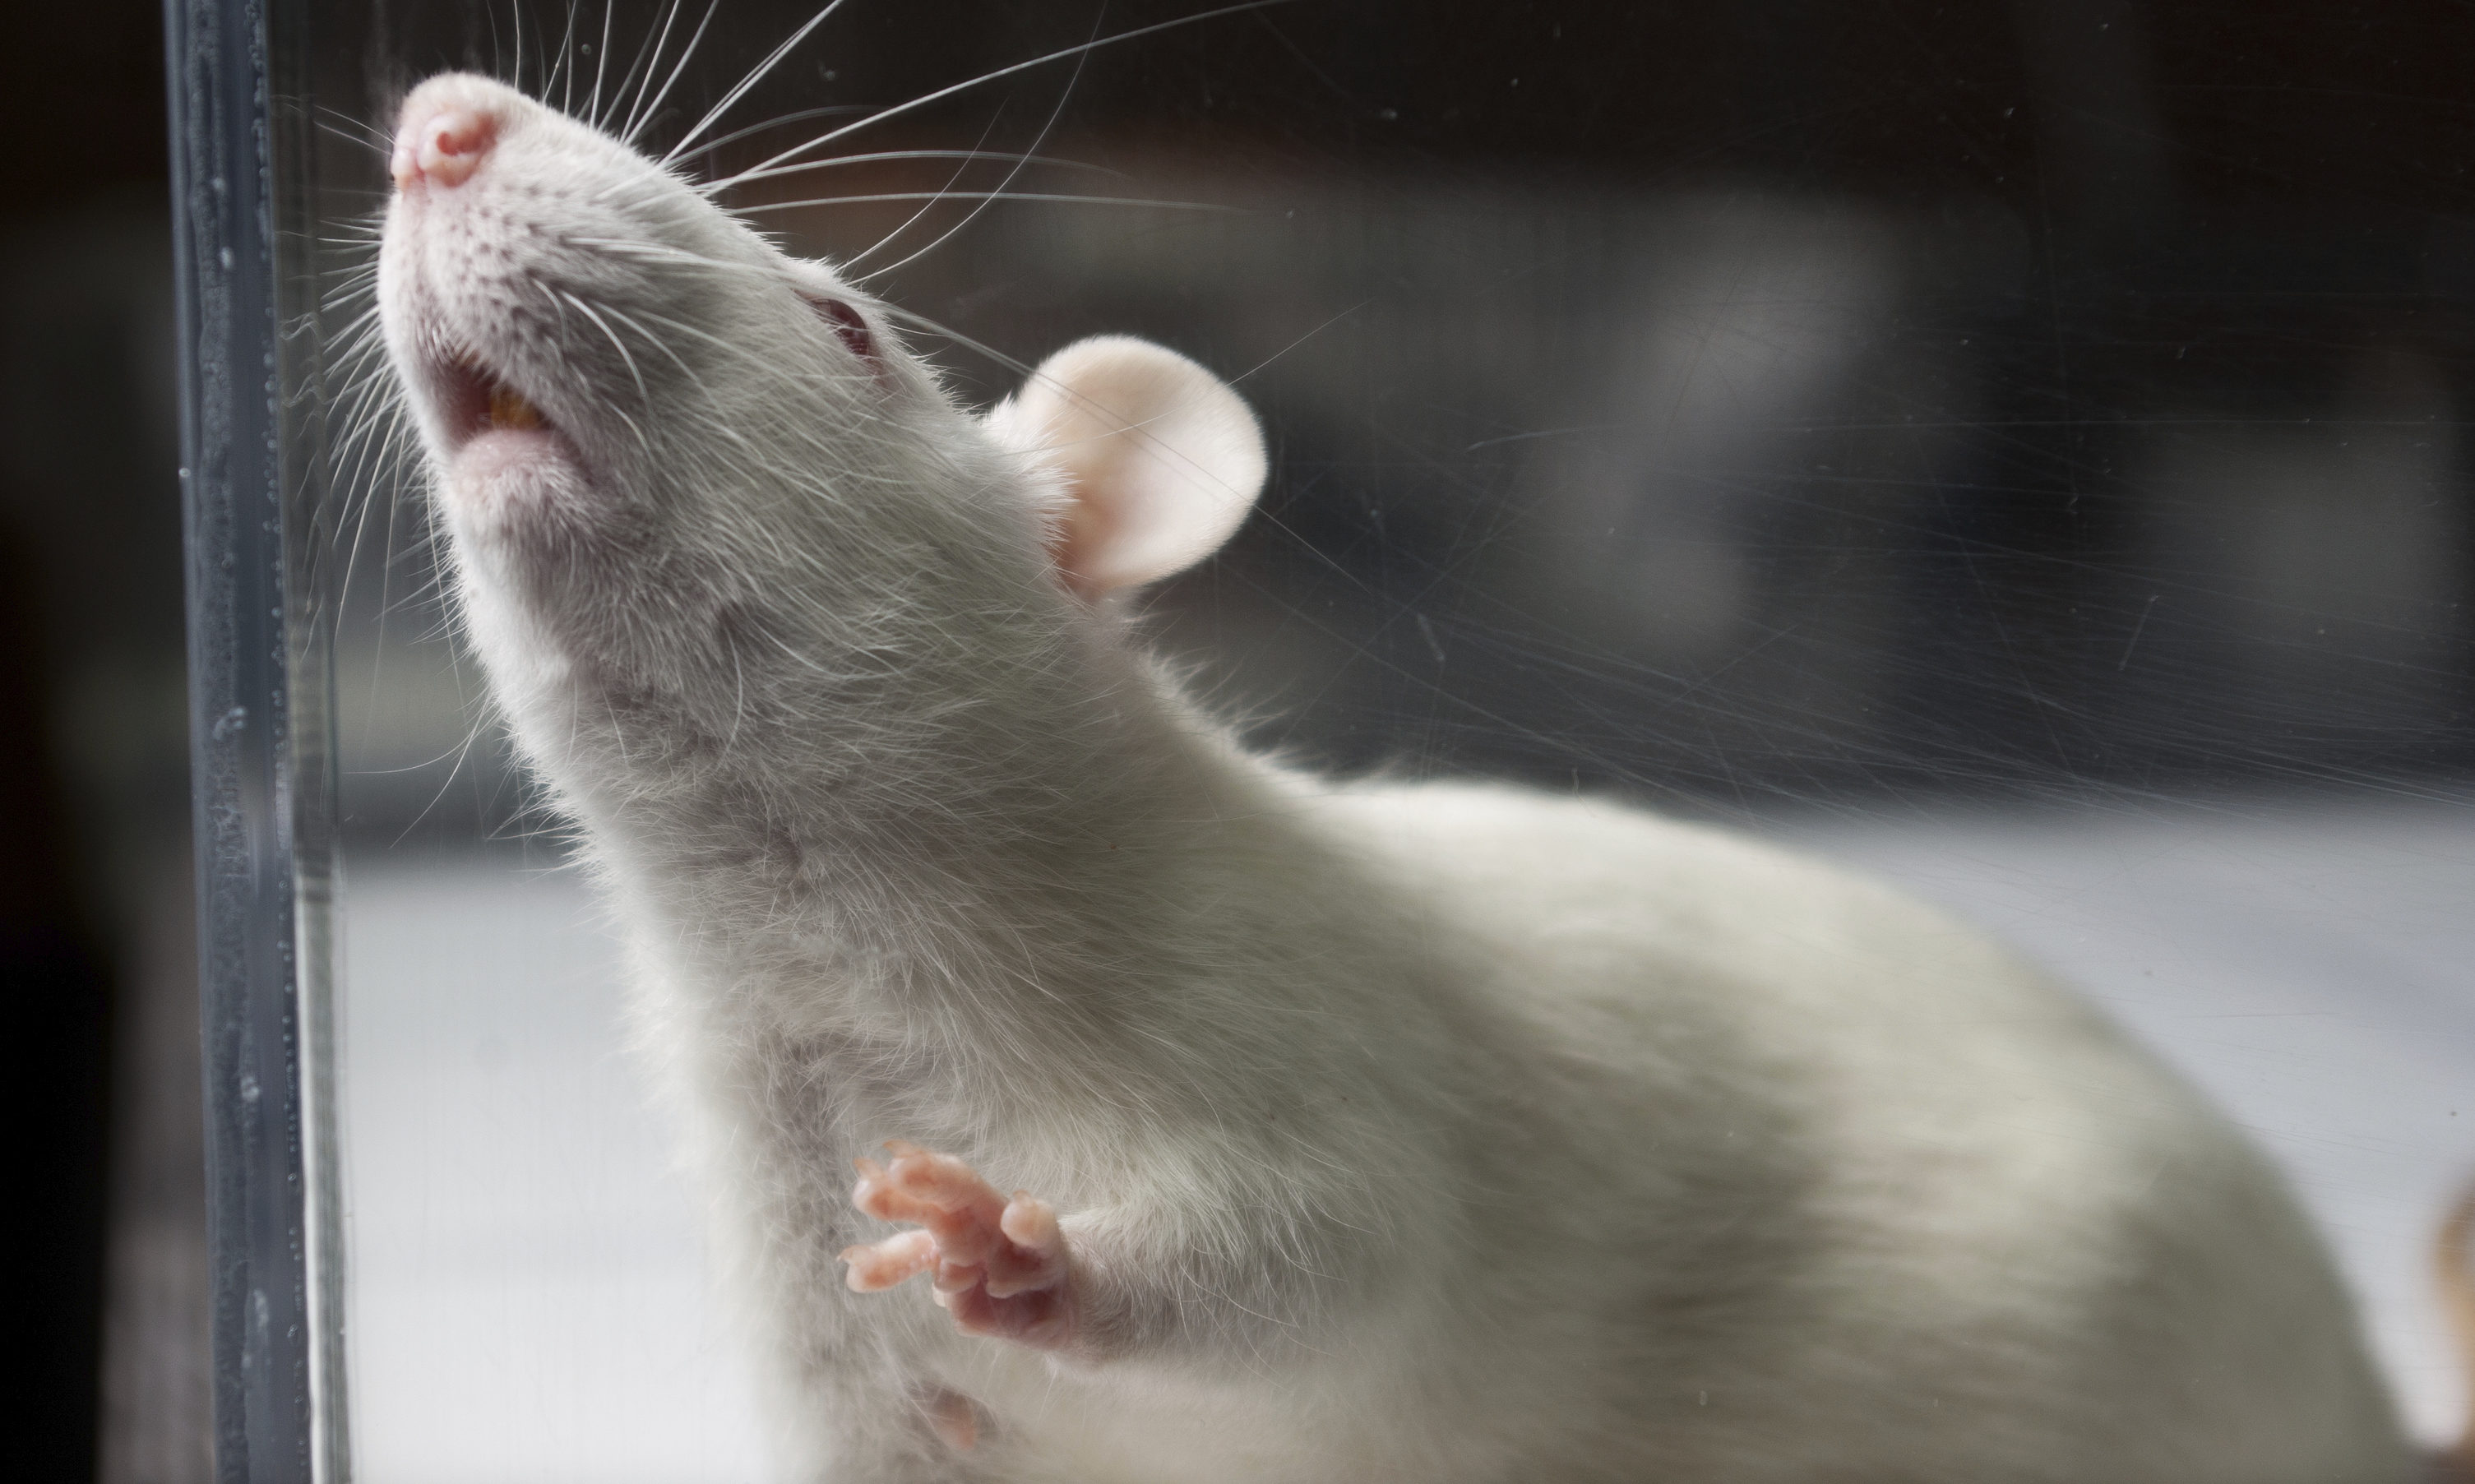 Rats, mice, and frogs were killed last year in experiments at Dundee University